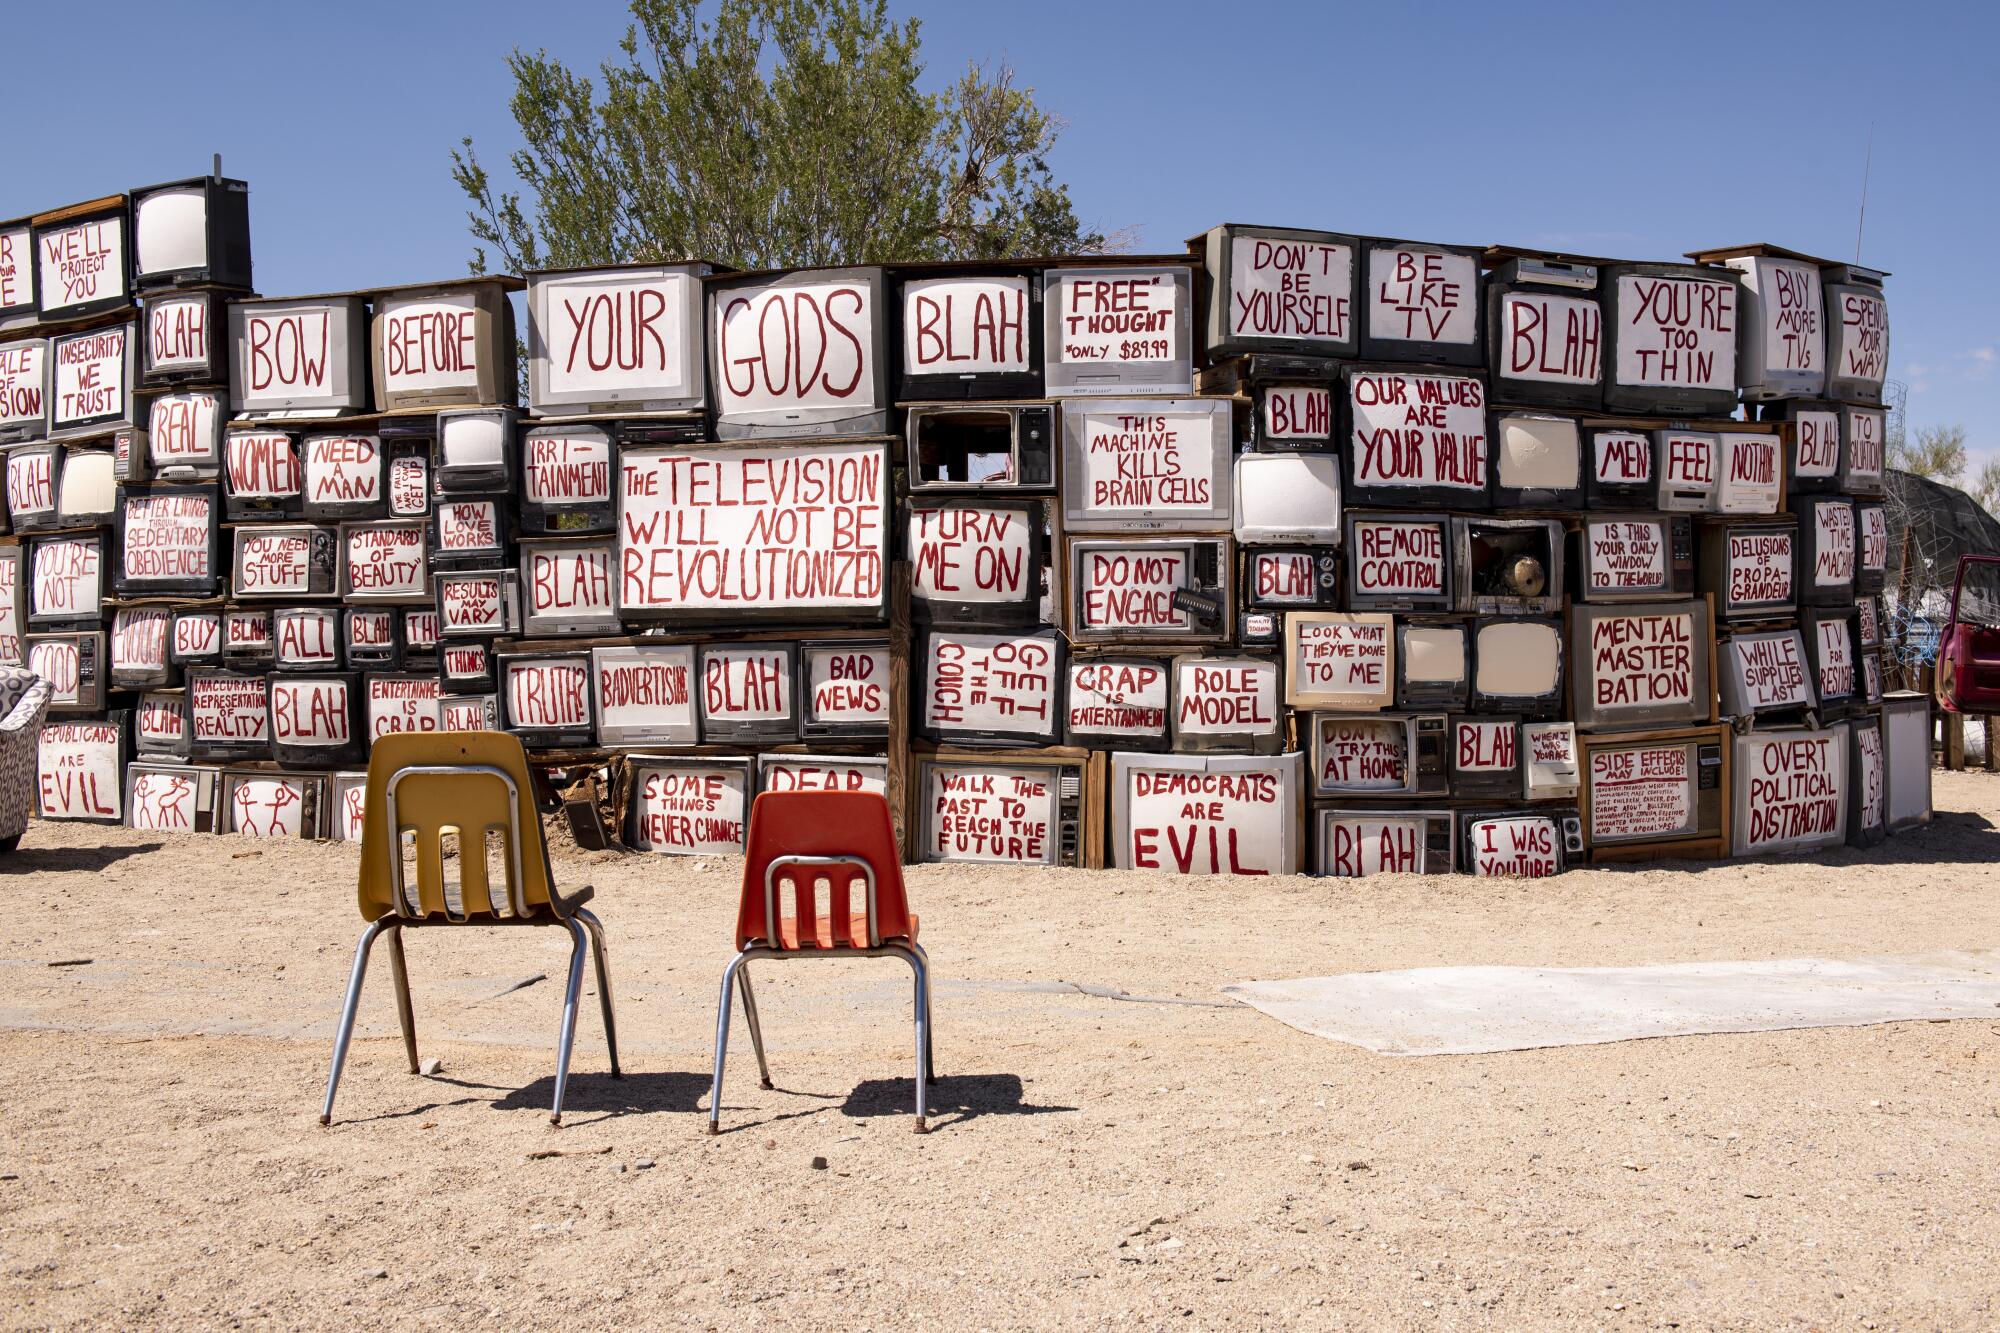 A wall of televisions, with white screens bearing messages in red letters, in an outdoor setting